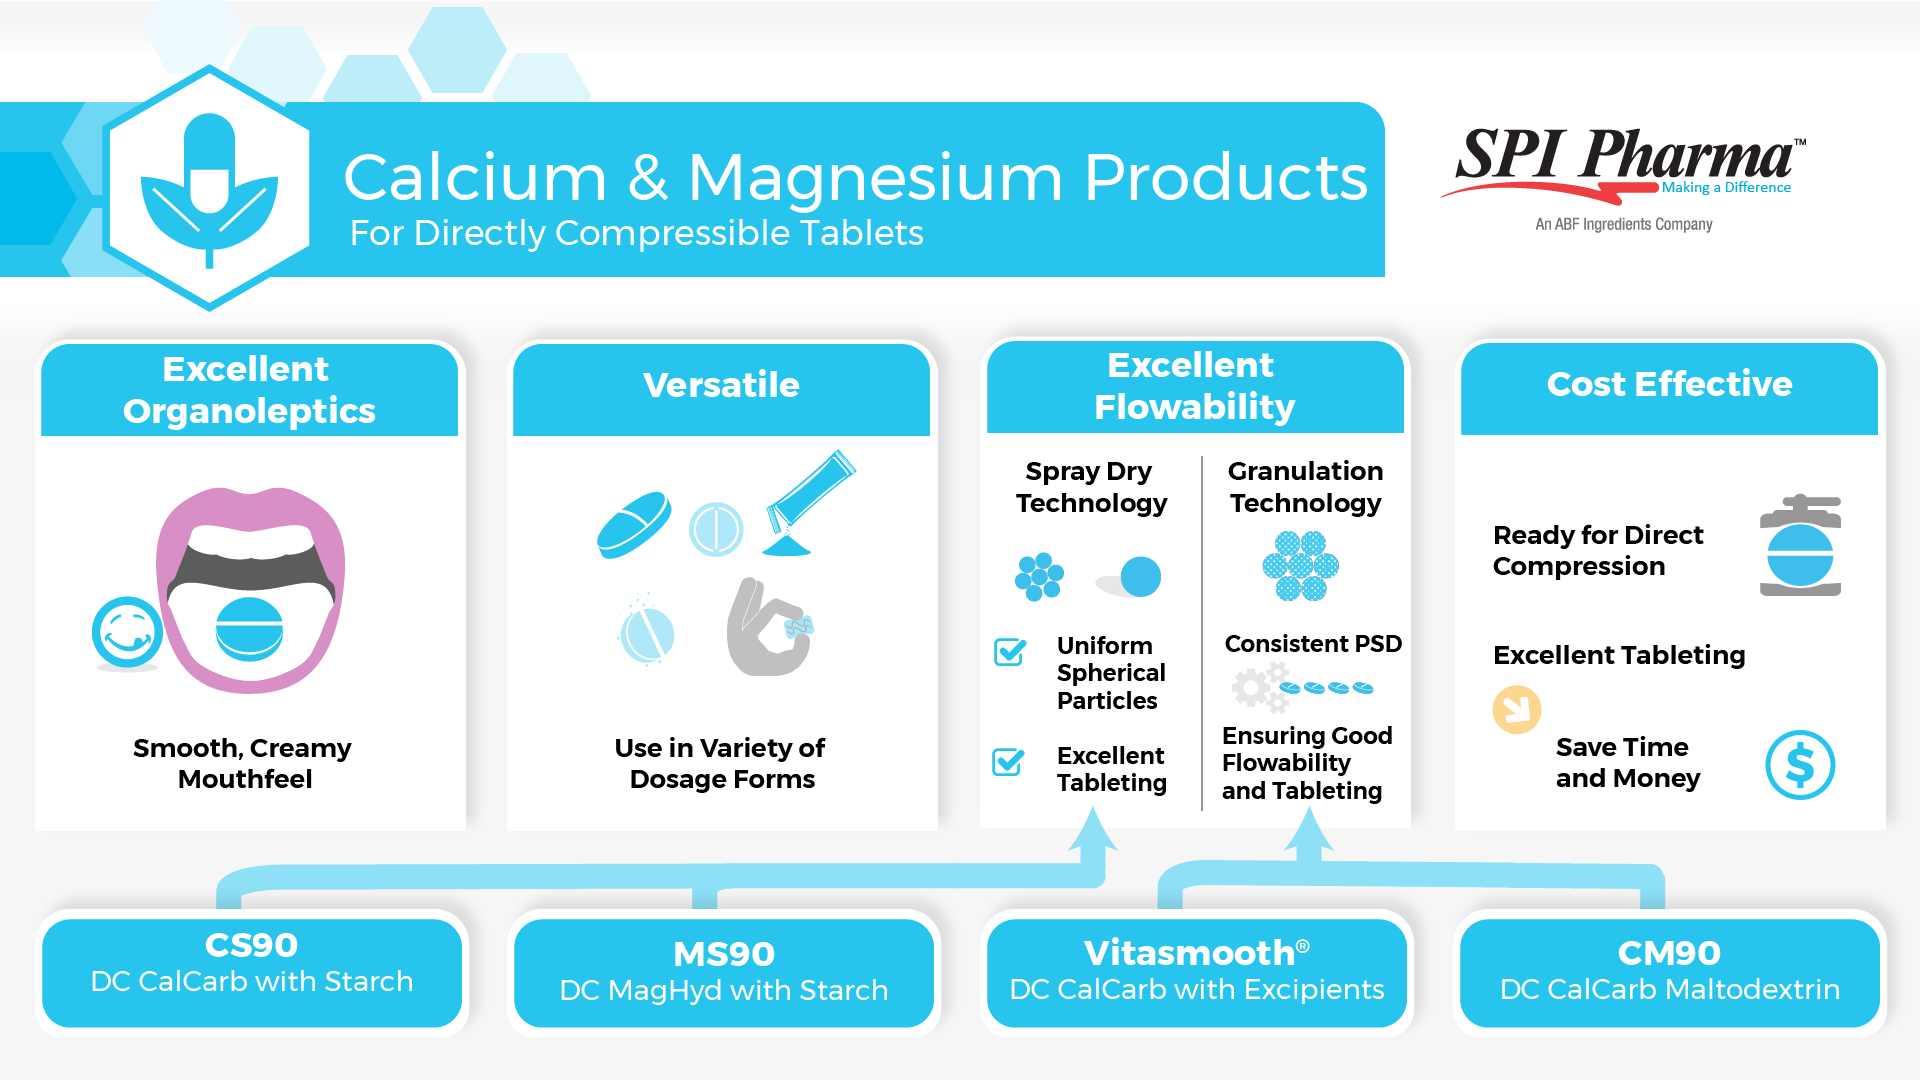 Calcium & Magnesium Products for Mineral Supplements